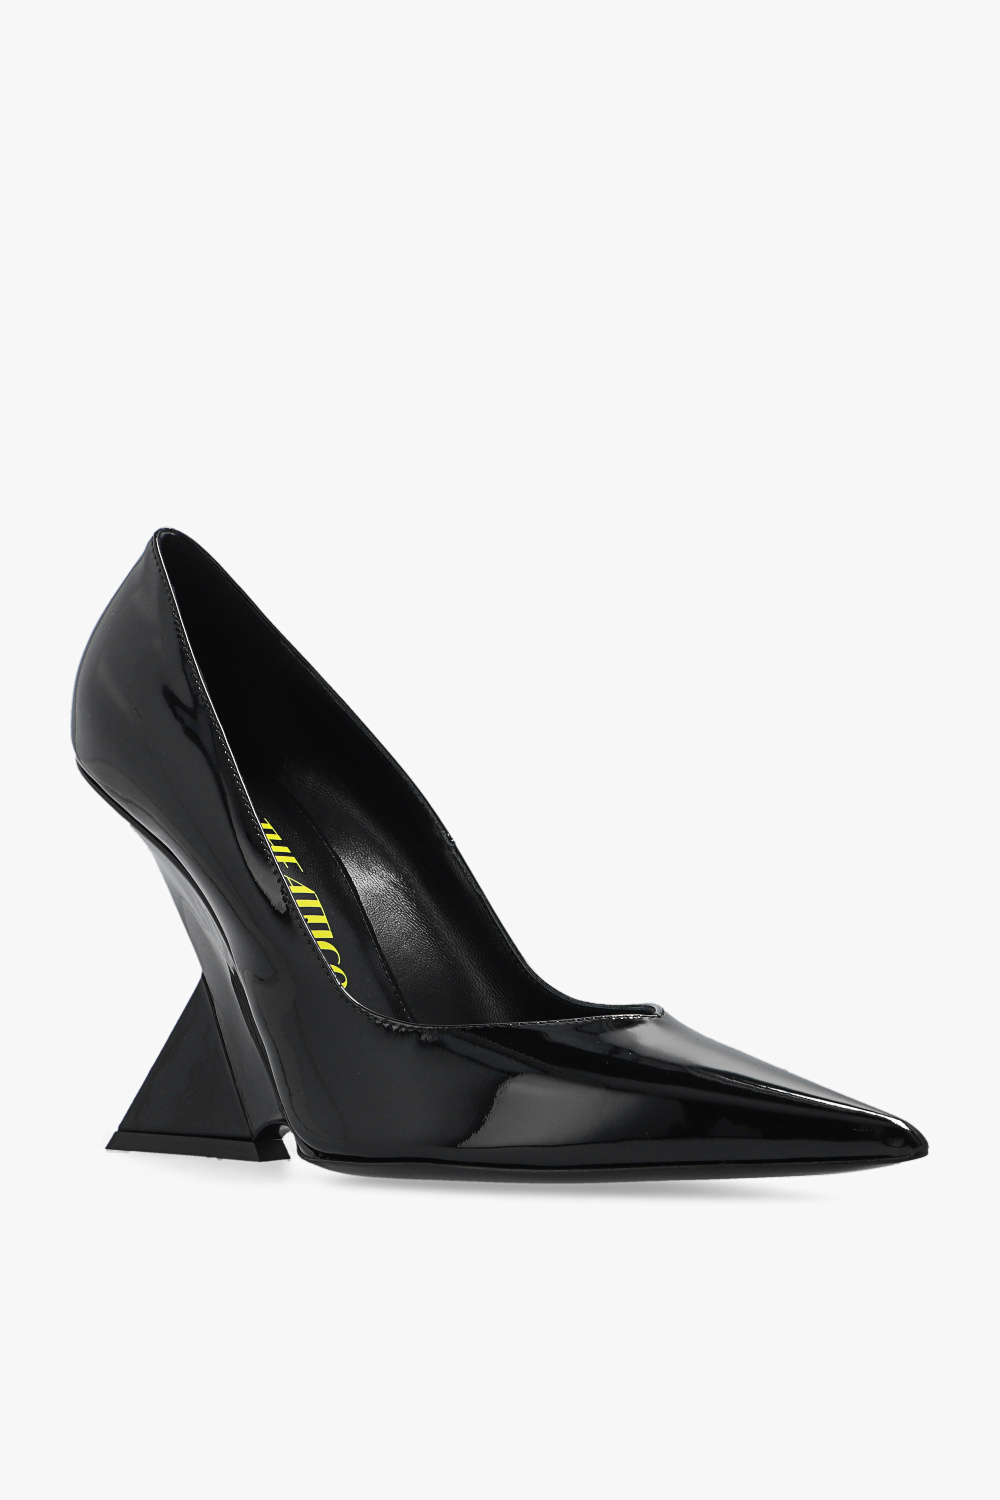 The Attico ‘Cheope’ patent leather wedge mules